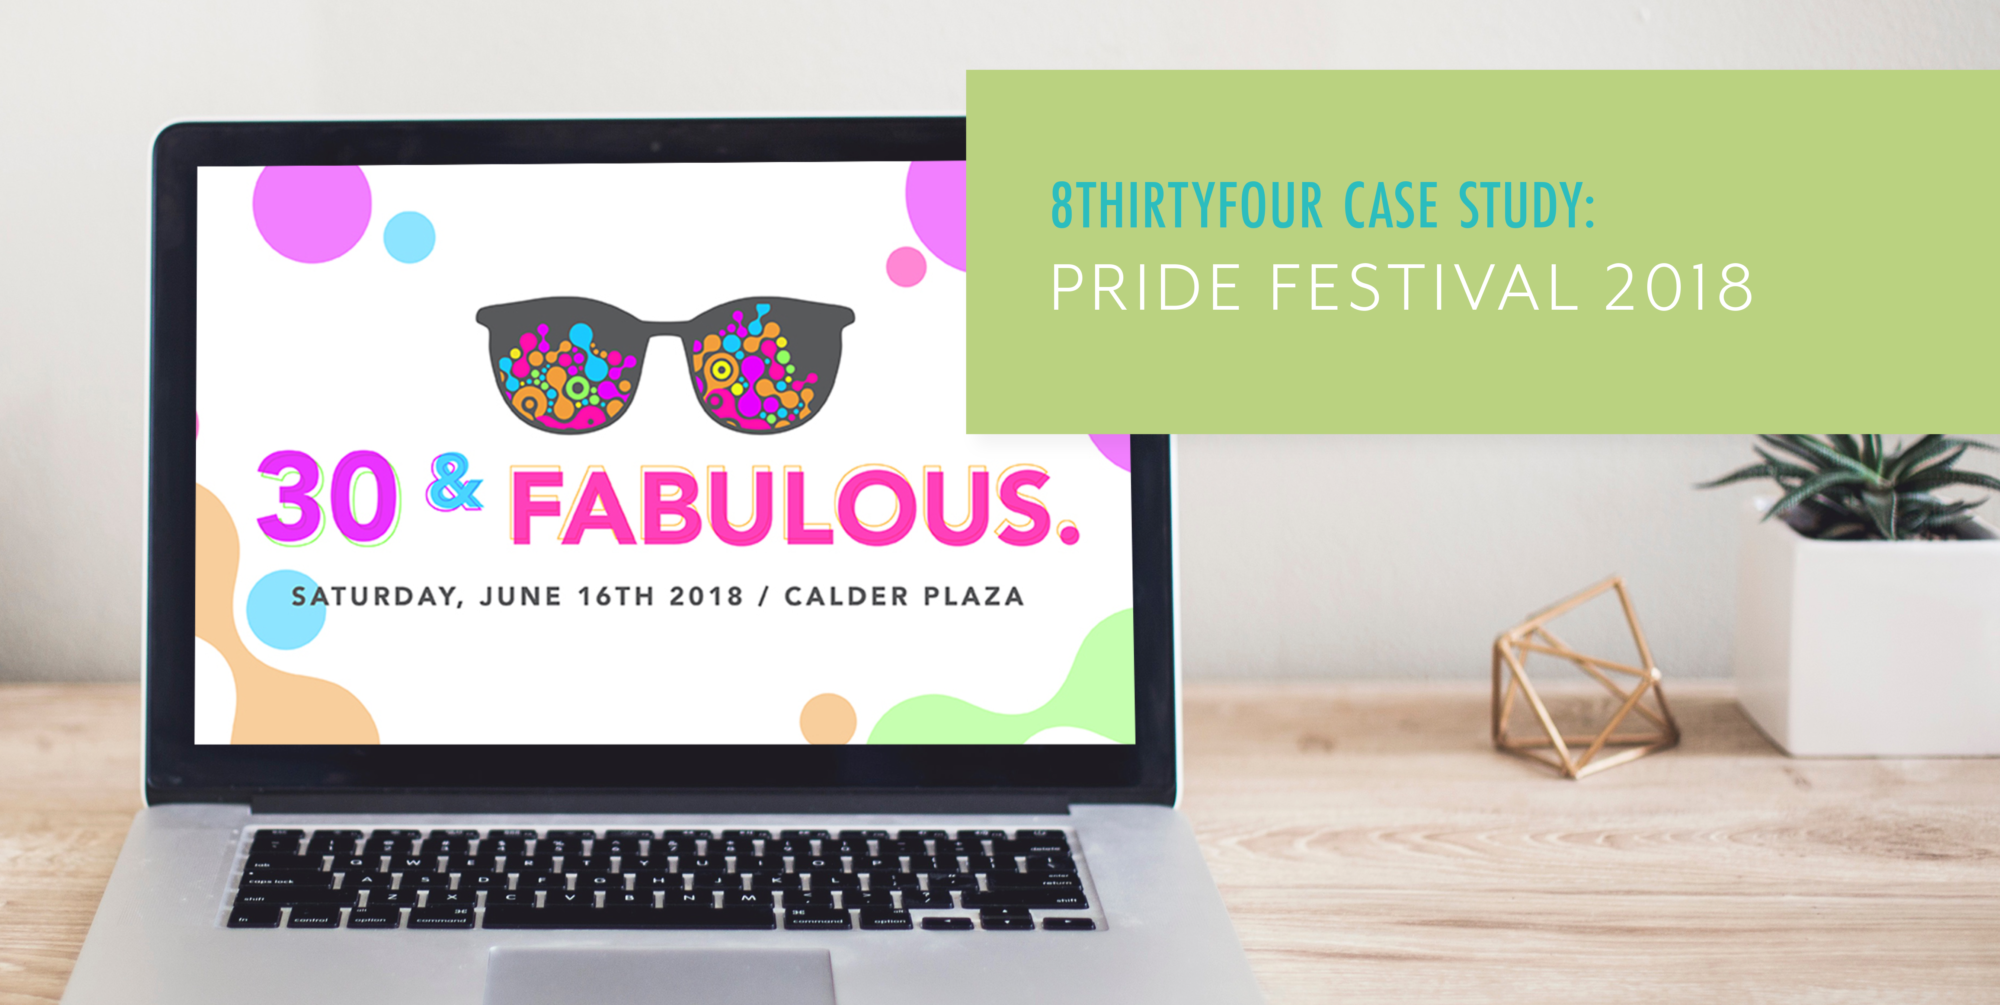 A laptop displays an advertisement for the Grand Rapids Pride festival while a green box reads, "8THIRTYFOUR Case Study: Pride Festival 2018"